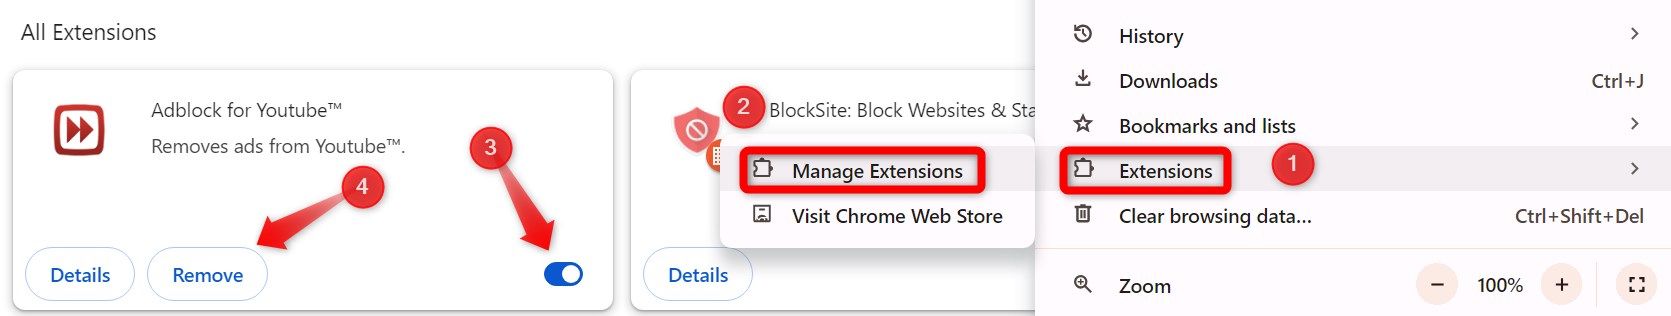 Disabling or removing an extension in Chrome settings.